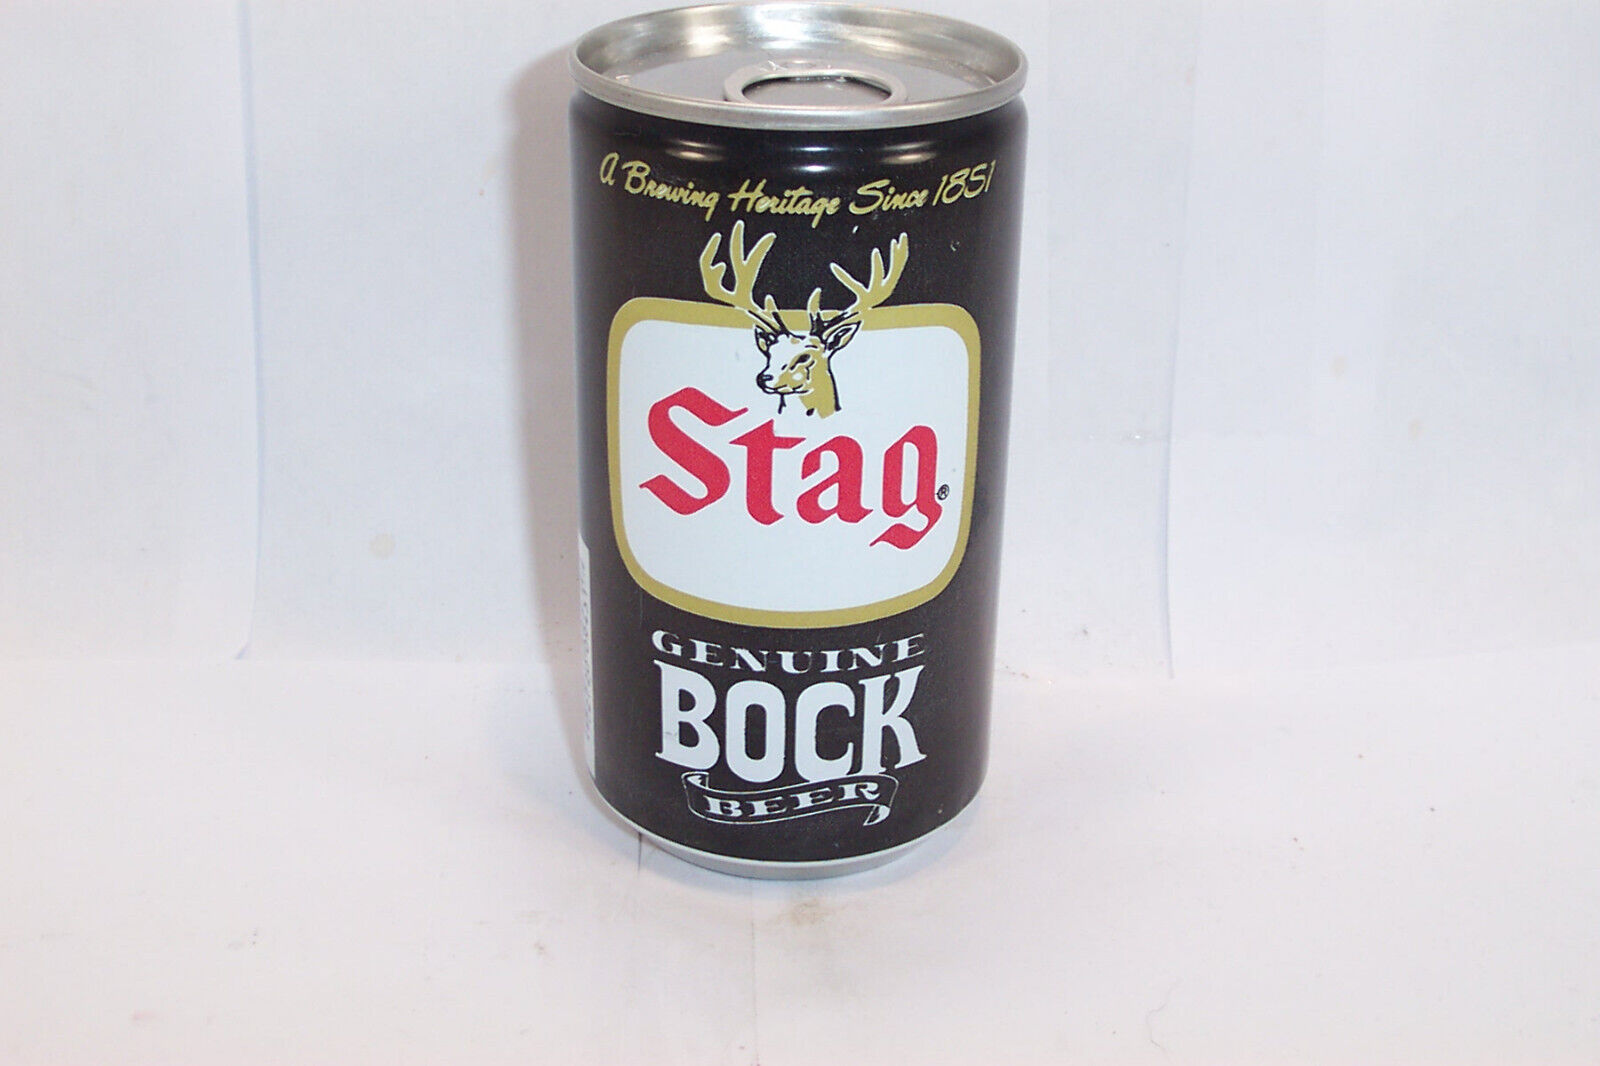 Stag Bock Beer   Drawn Ironed     Carling National    Belleville IL   USBC 126/2